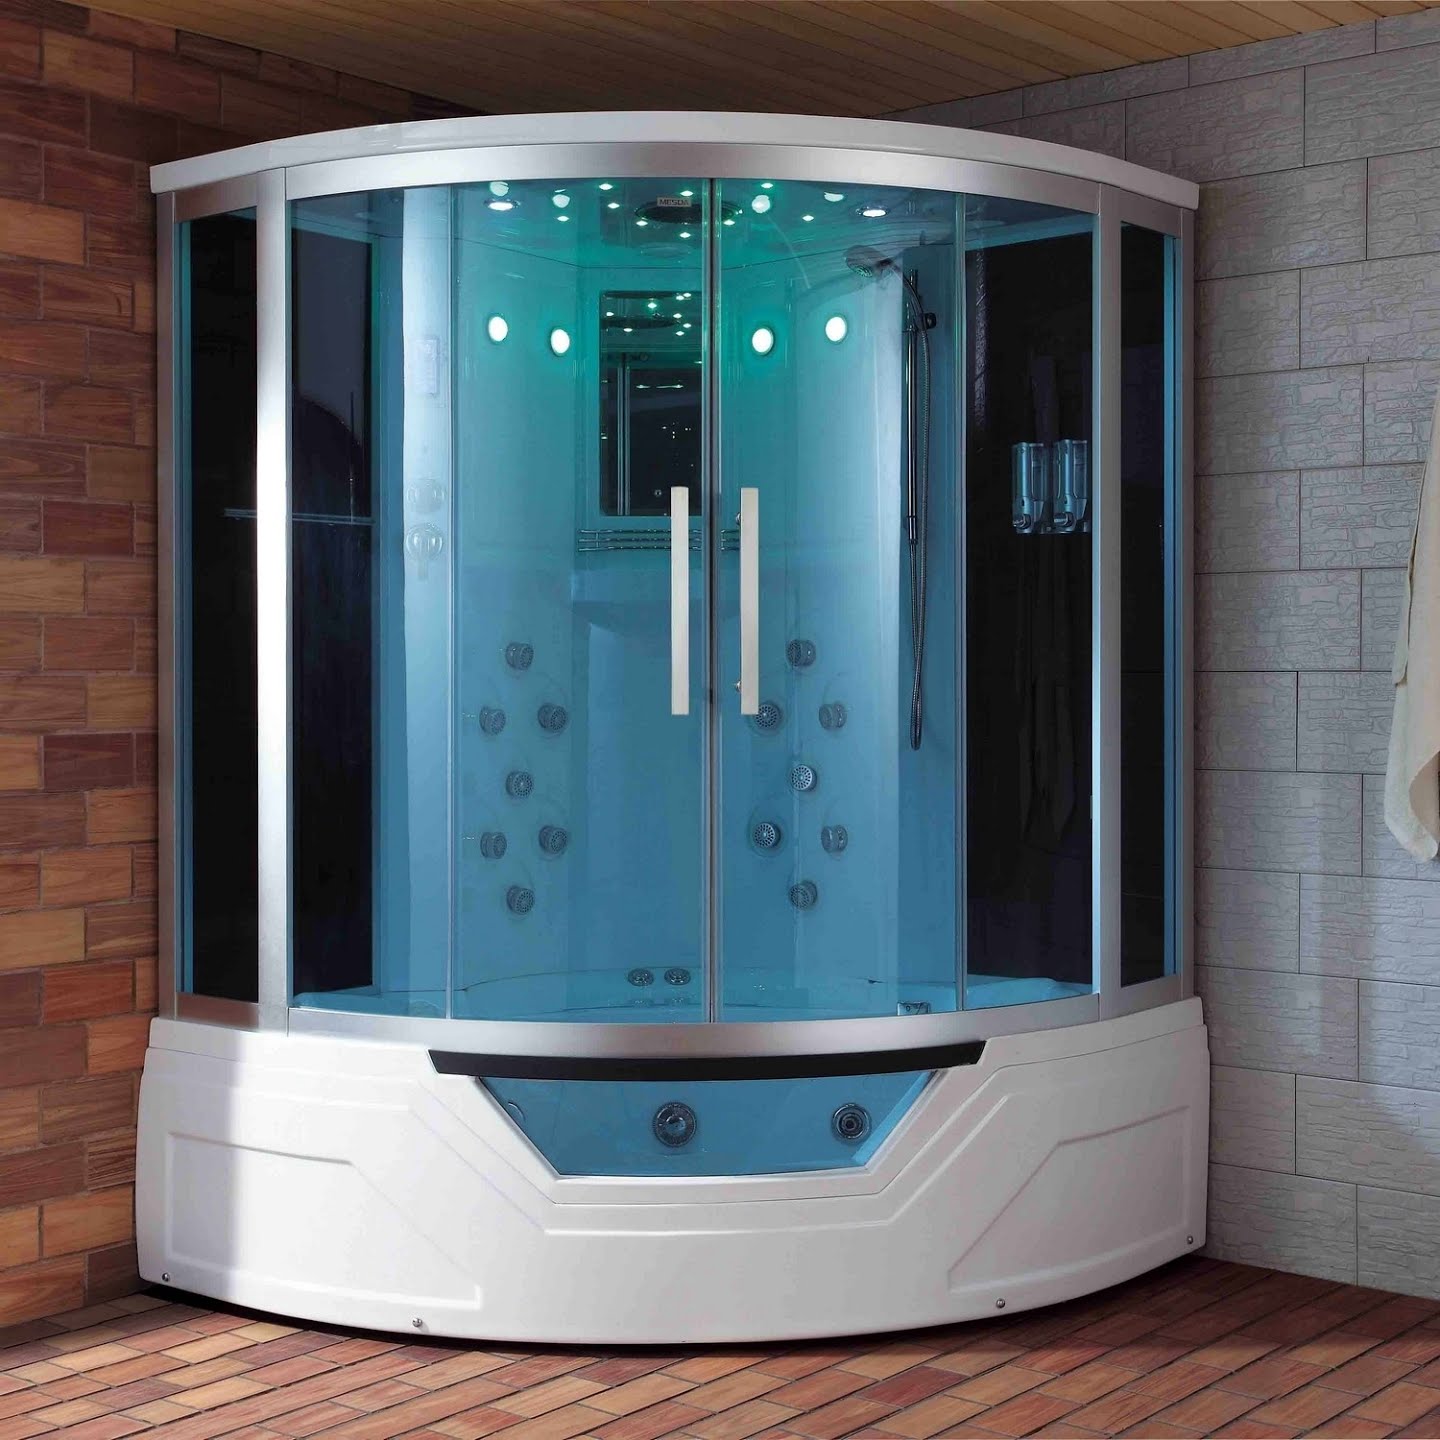 Steam Shower Tub Combo Visualhunt, Jacuzzi Bathtubs With Showers